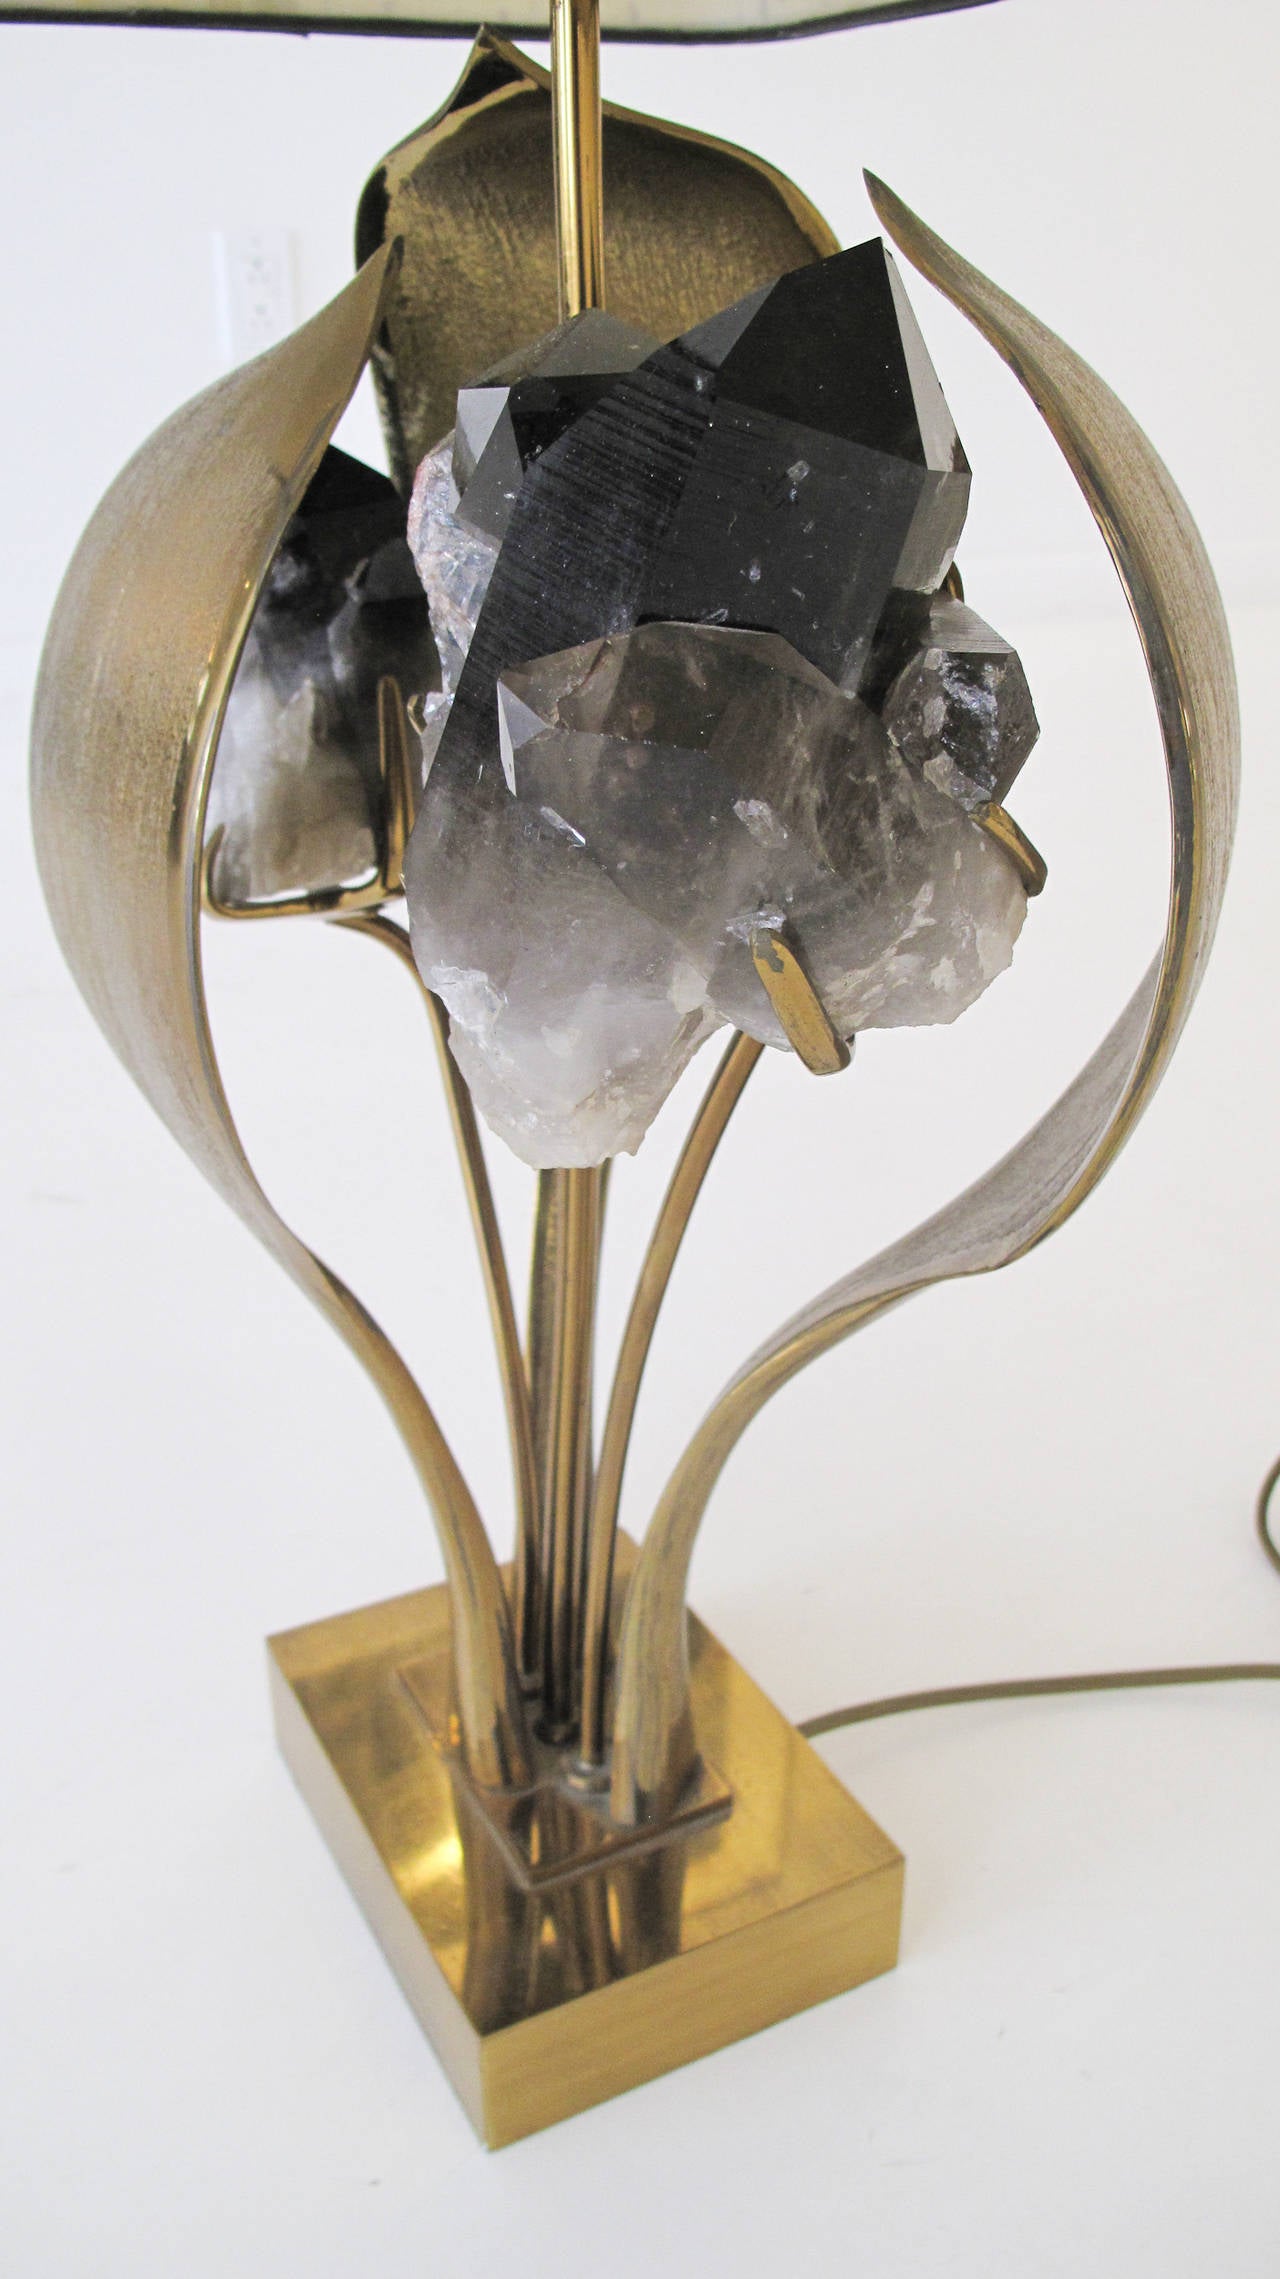 Polished cast bronze table lamp inset with large smoked amethyst crystals, enclosed by three cast bronze leaves. Signed 